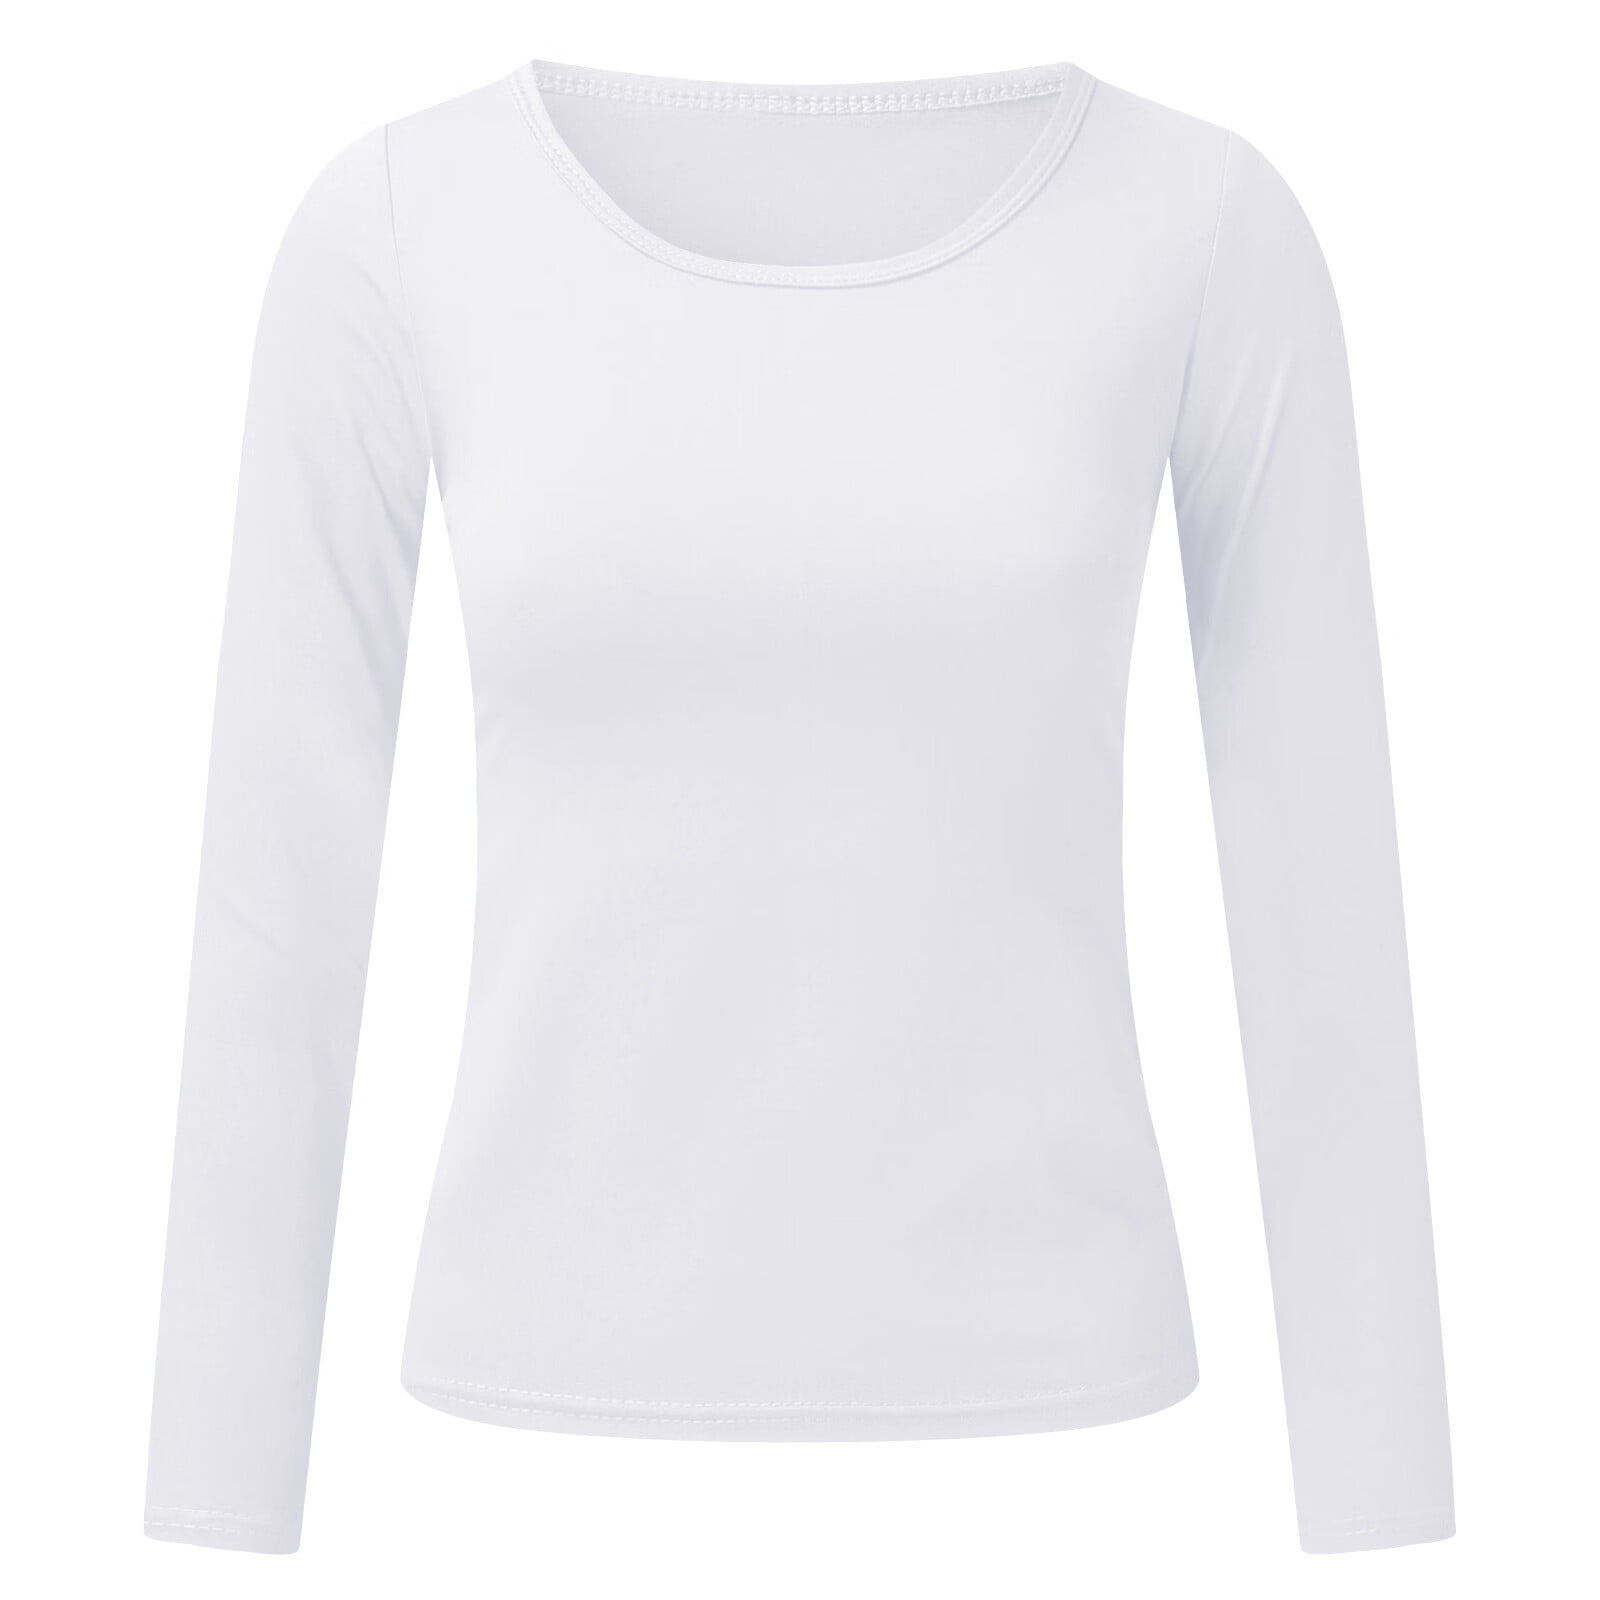 T-Shirts for Women Women's Casual Solid Color Shirts Long Sleeve T-Shirts  Loose O-neck Blouse Polyester no underwire sports bra White 